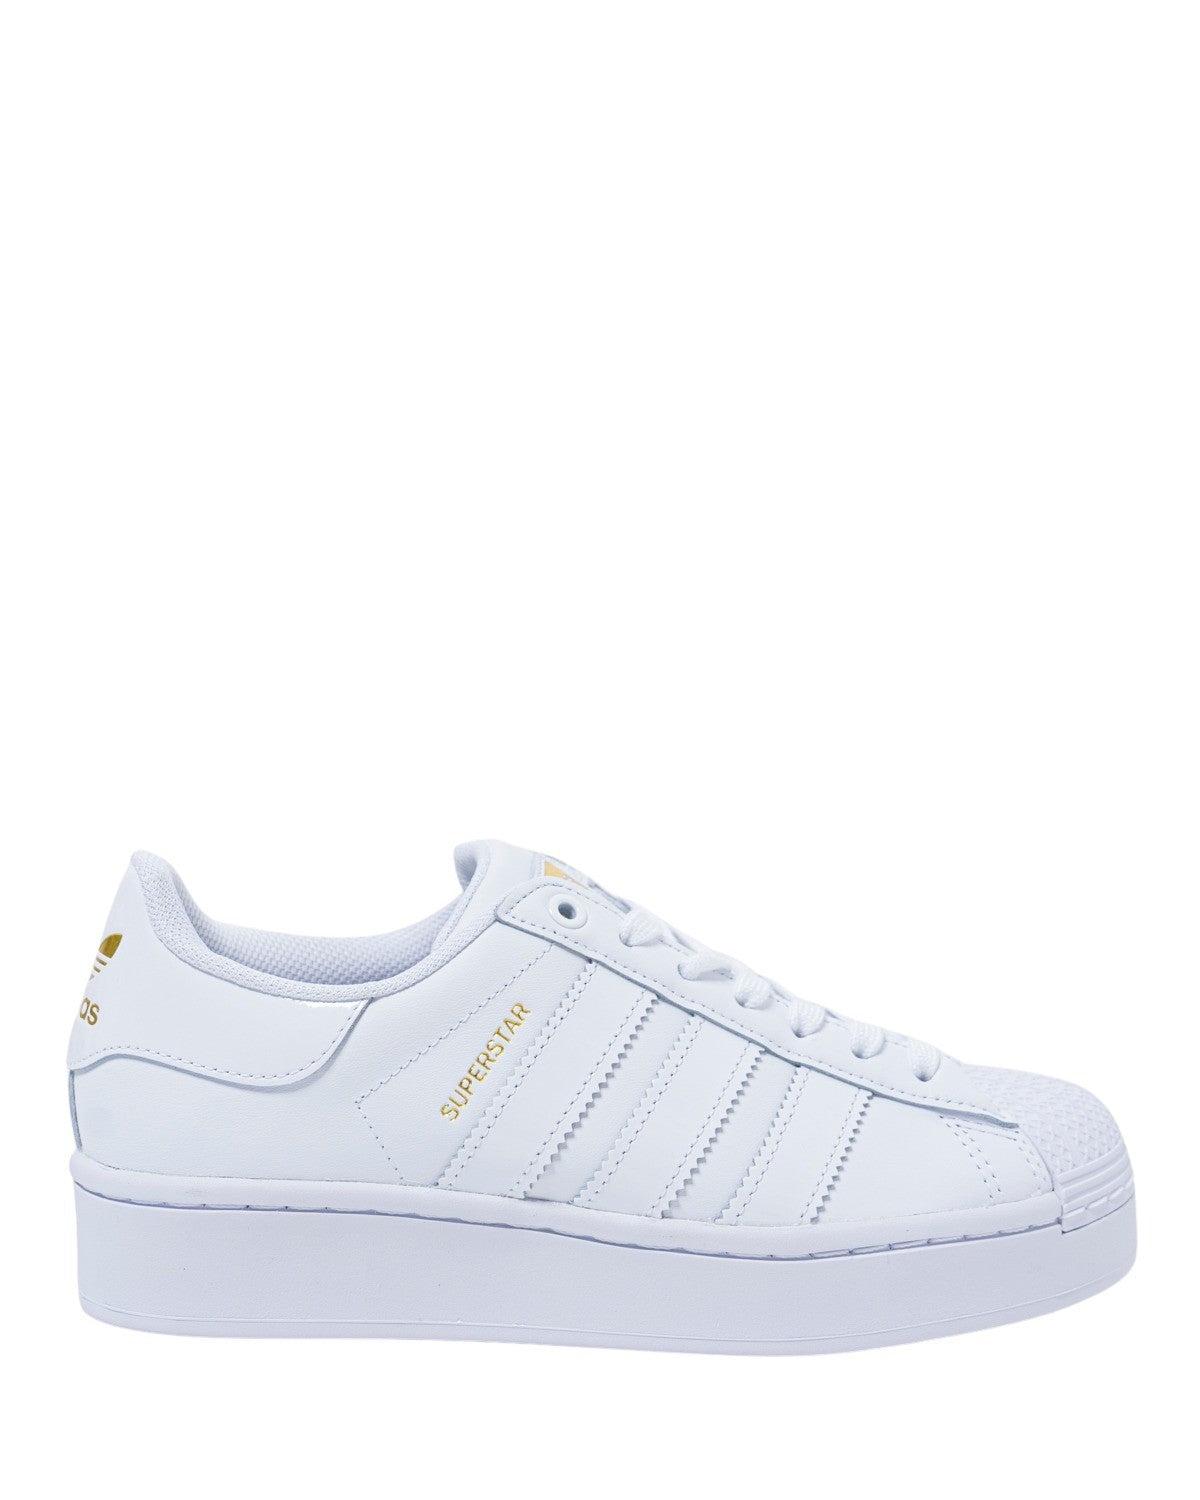 adidas Rubber Sneakers in White | Lyst